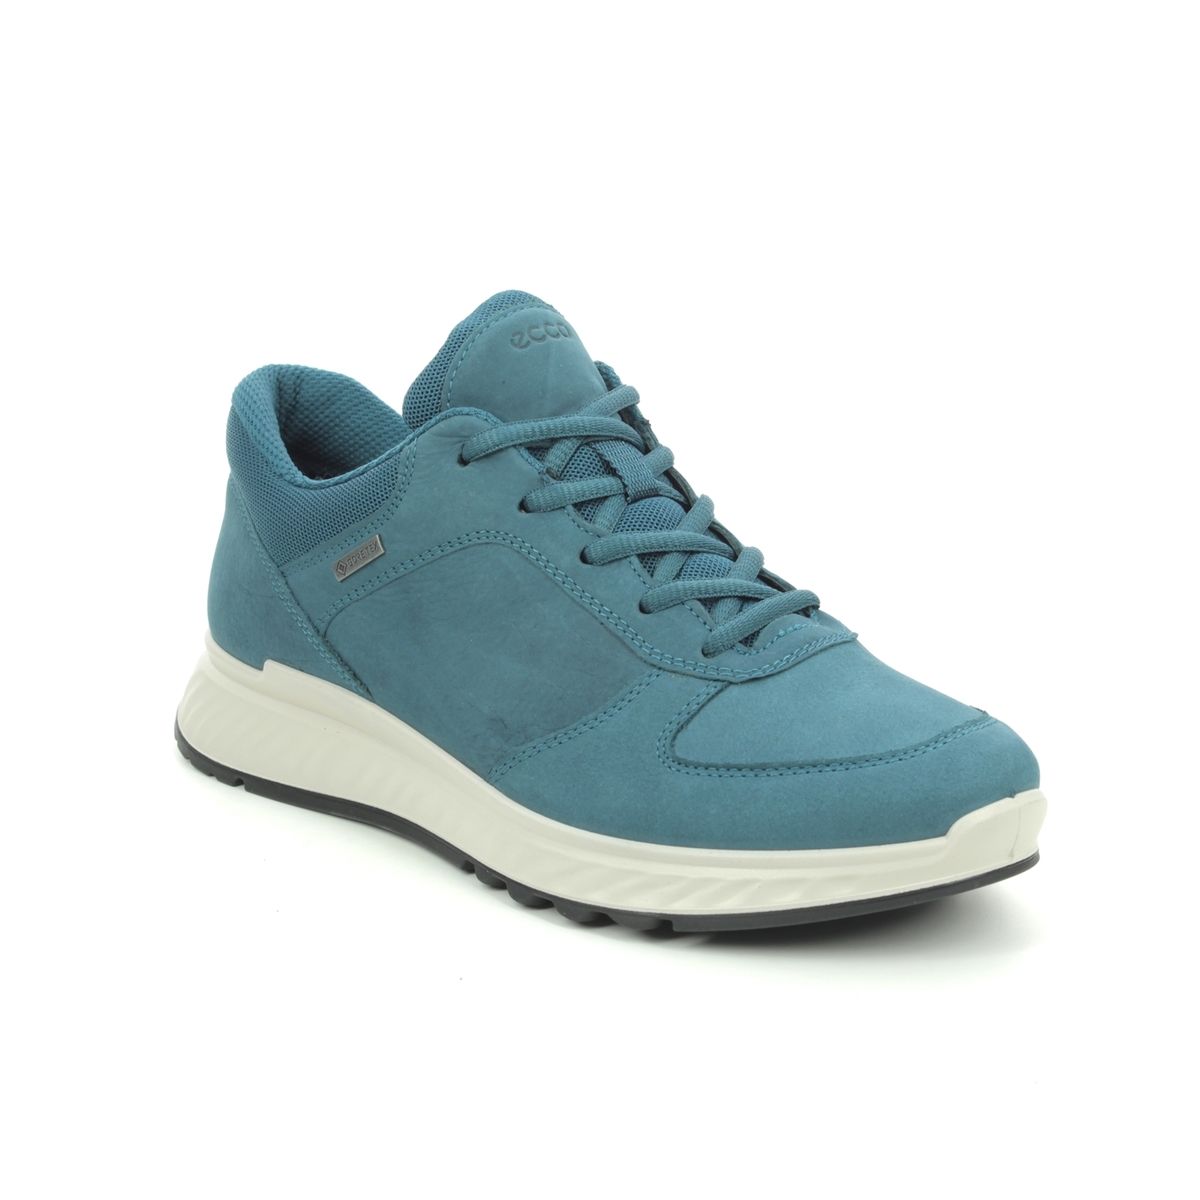 Exostride Gore 835303-01541 Teal blue trainers